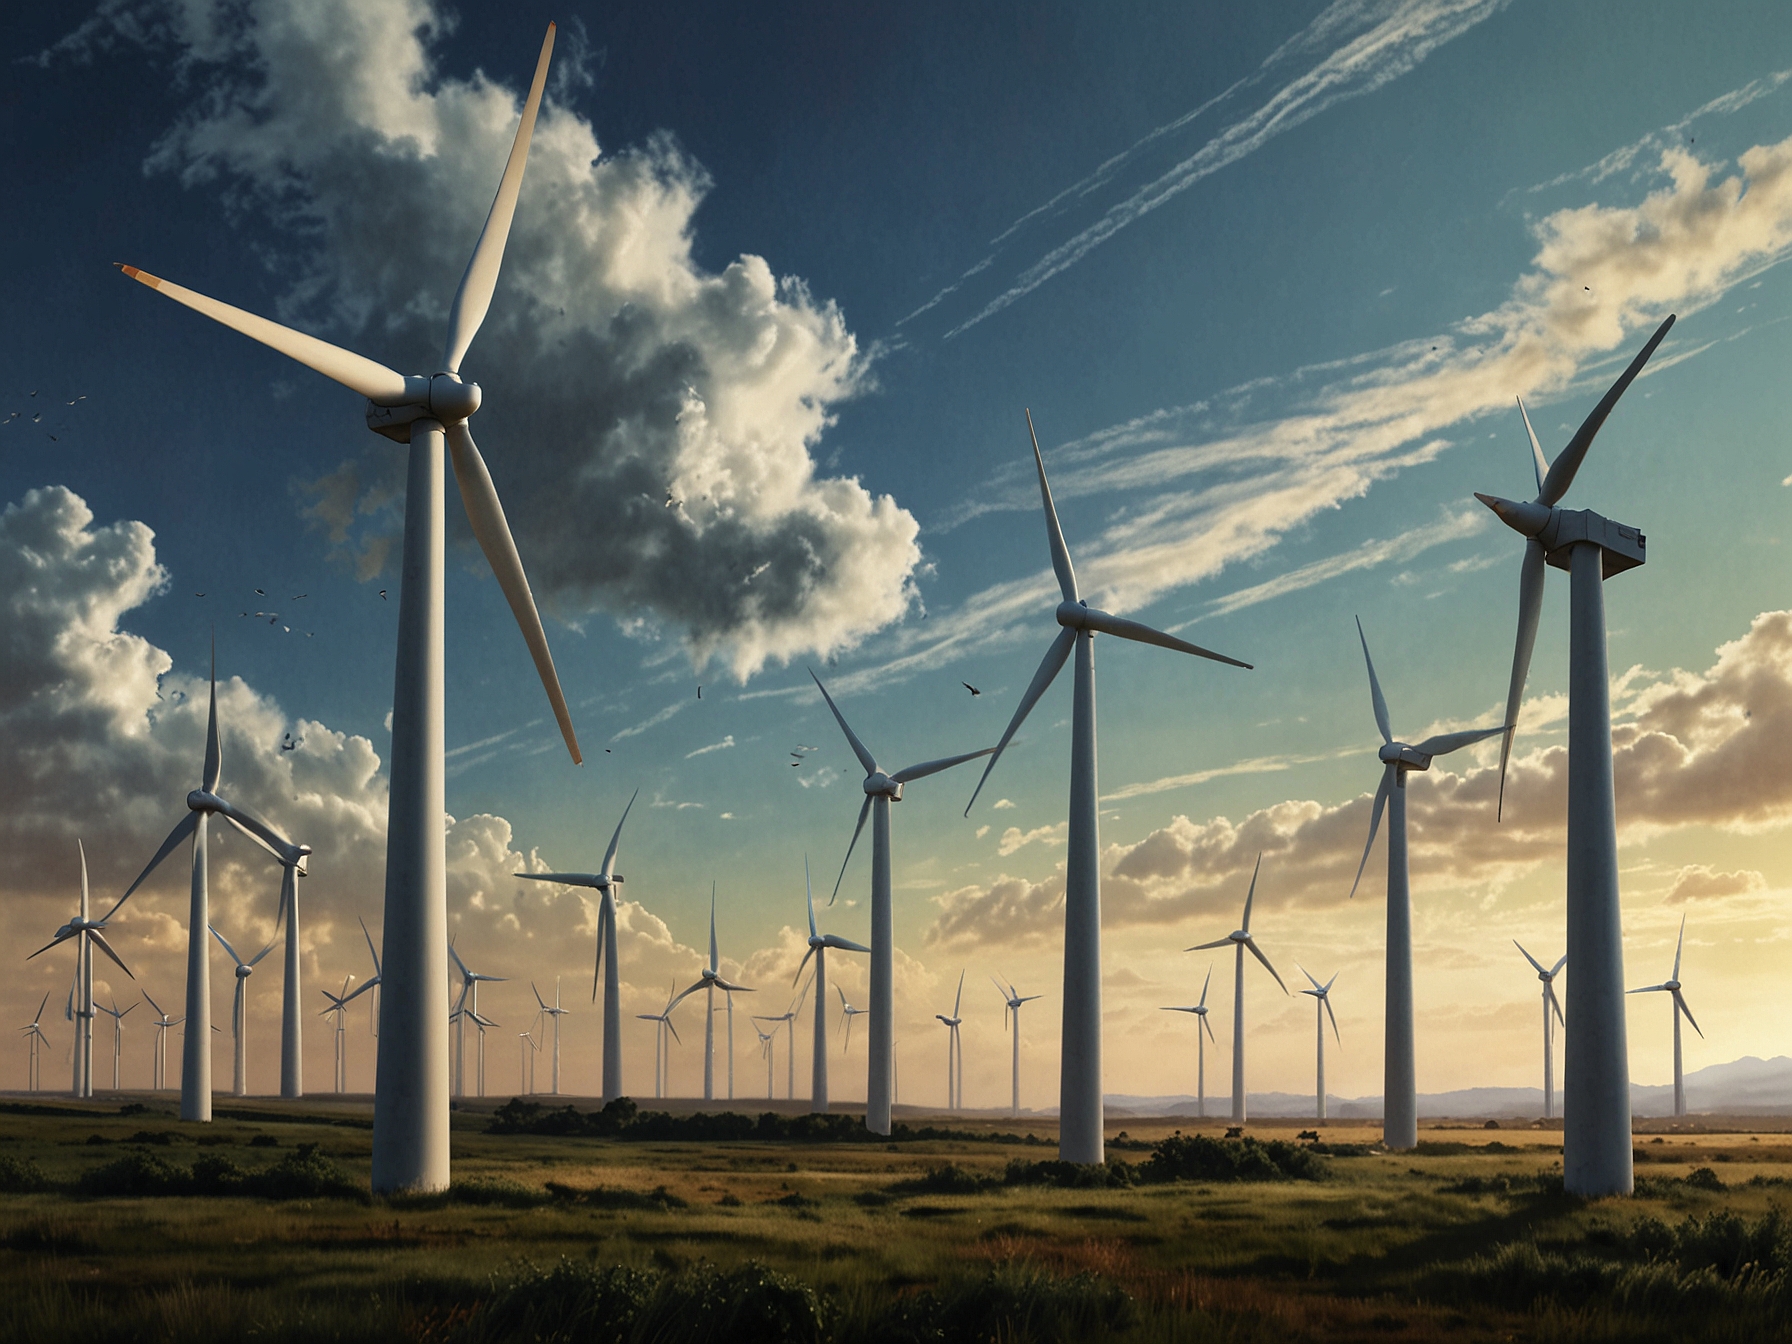 An image of a wind farm representing Suzlon Energy's advancements in wind turbine technology, underlining its role in driving the global shift towards renewable energy.